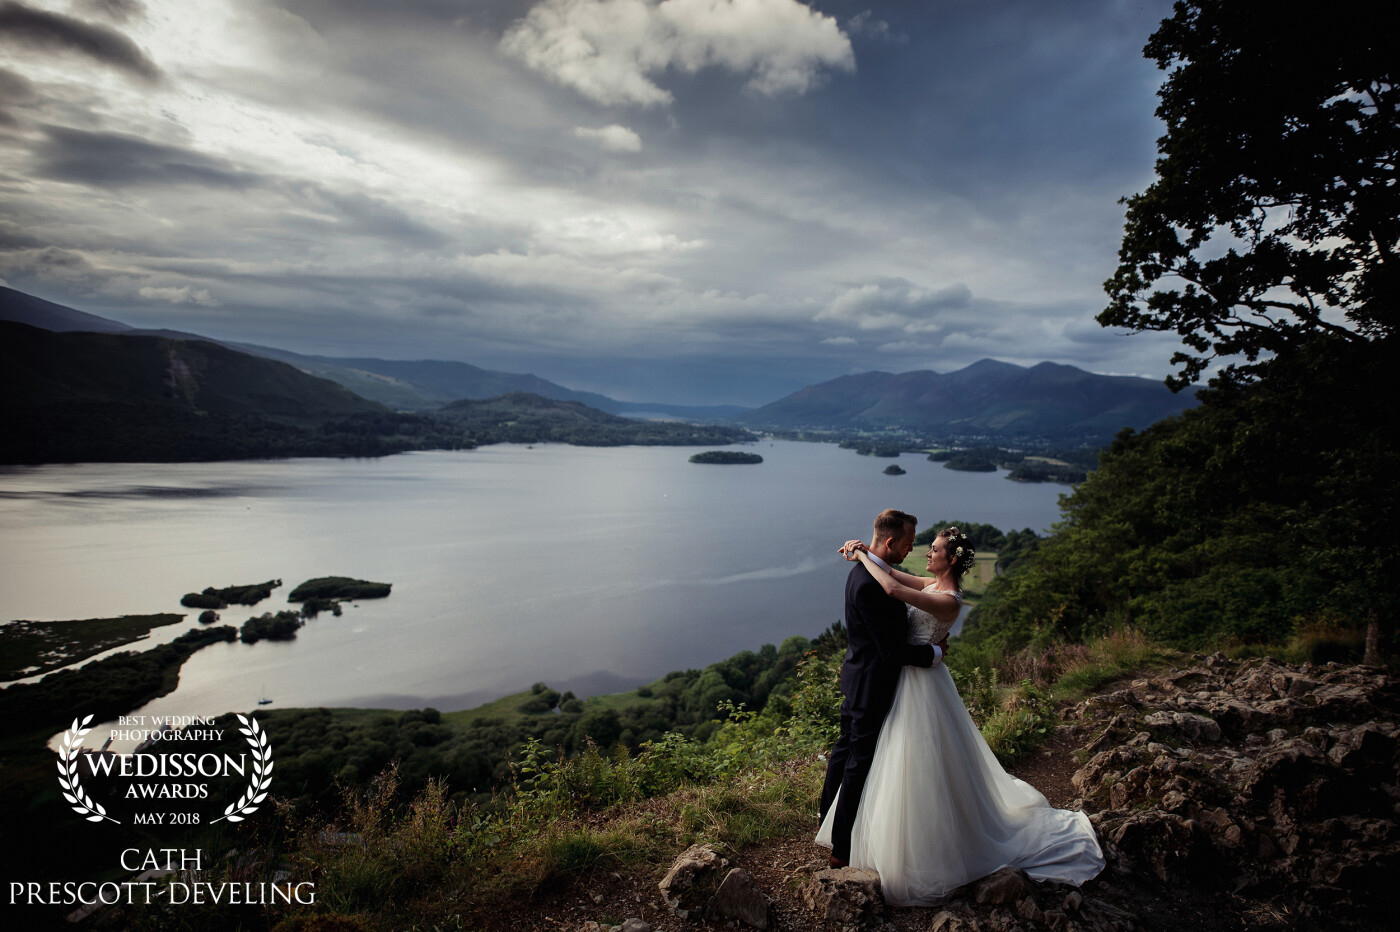 Literally THE best view in the Lake District, without climbing our highest fell.. which, with camera gear, not for the feint-hearted. Beautiful couple - beautiful shoot. 